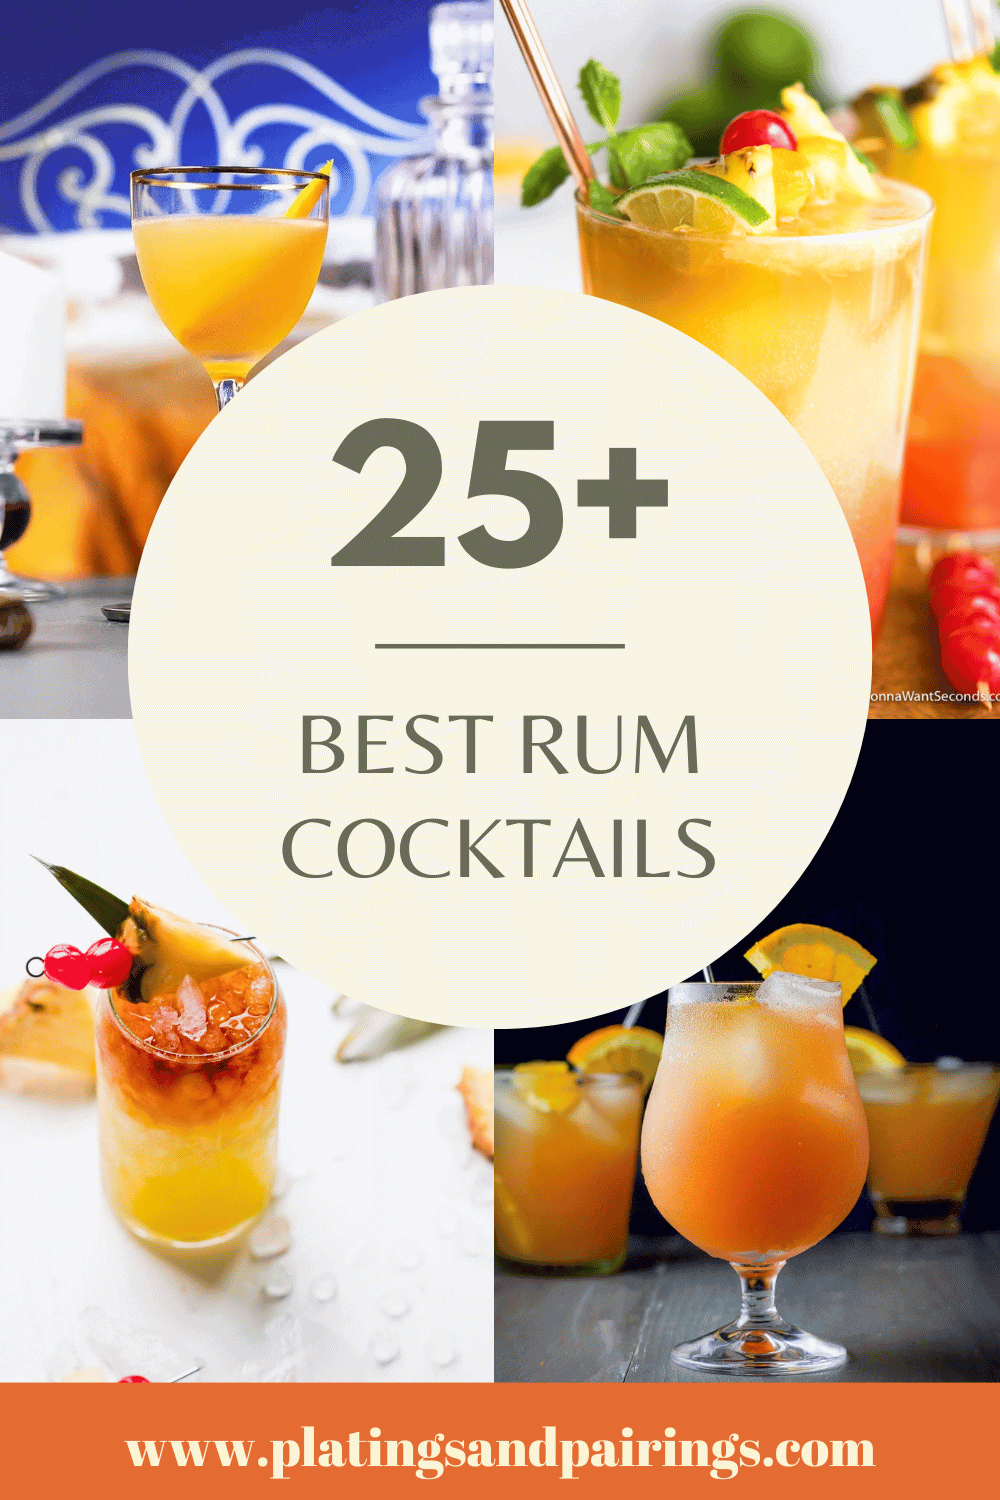 COLLAGE OF RUM COCKTAILS WITH TEXT OVERLAY.